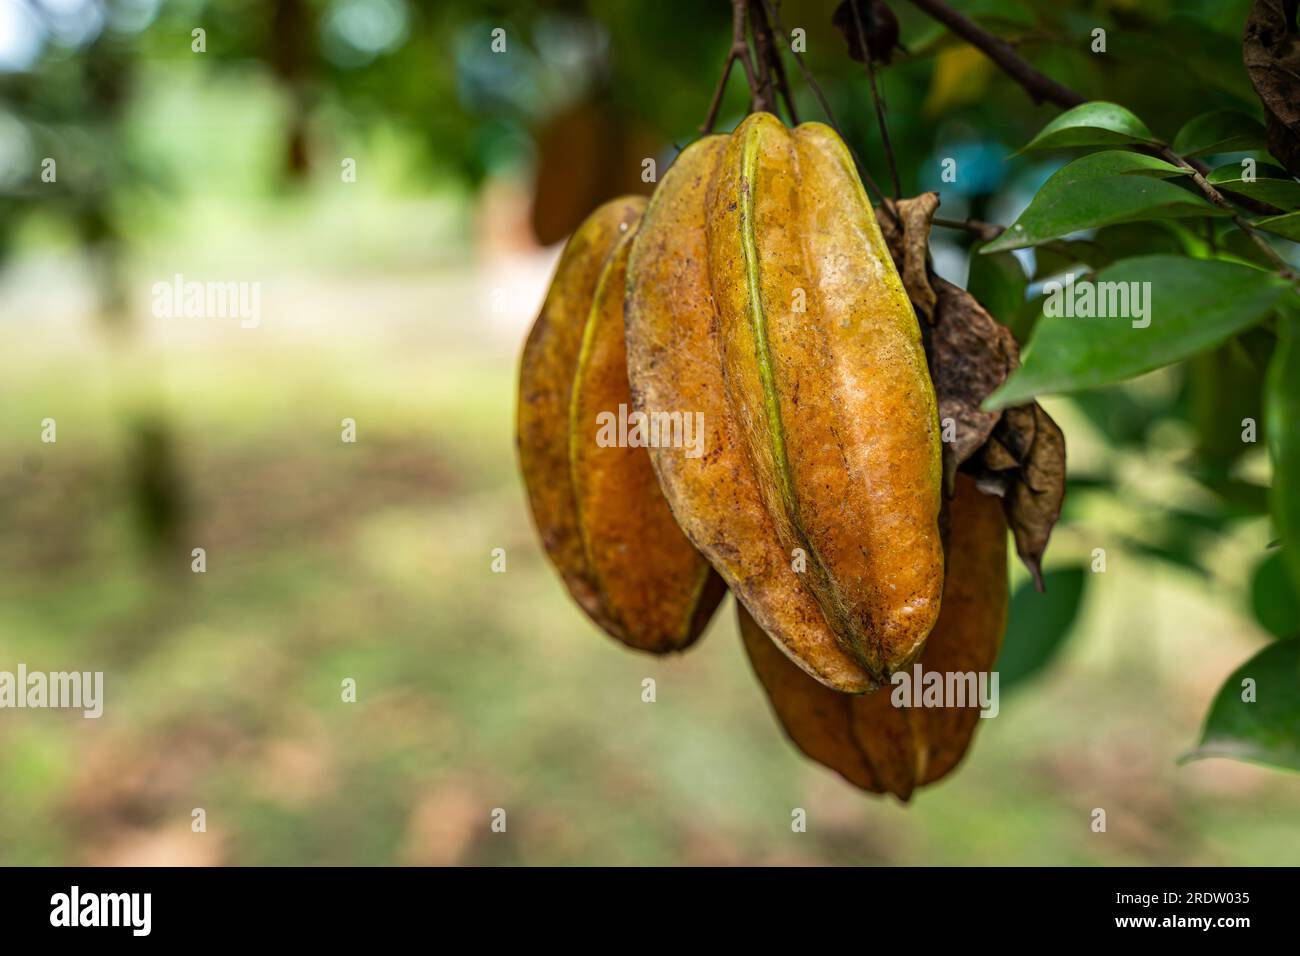 Close up view of a organic Star fruit -carambola tree full with Fruit Stock Photo